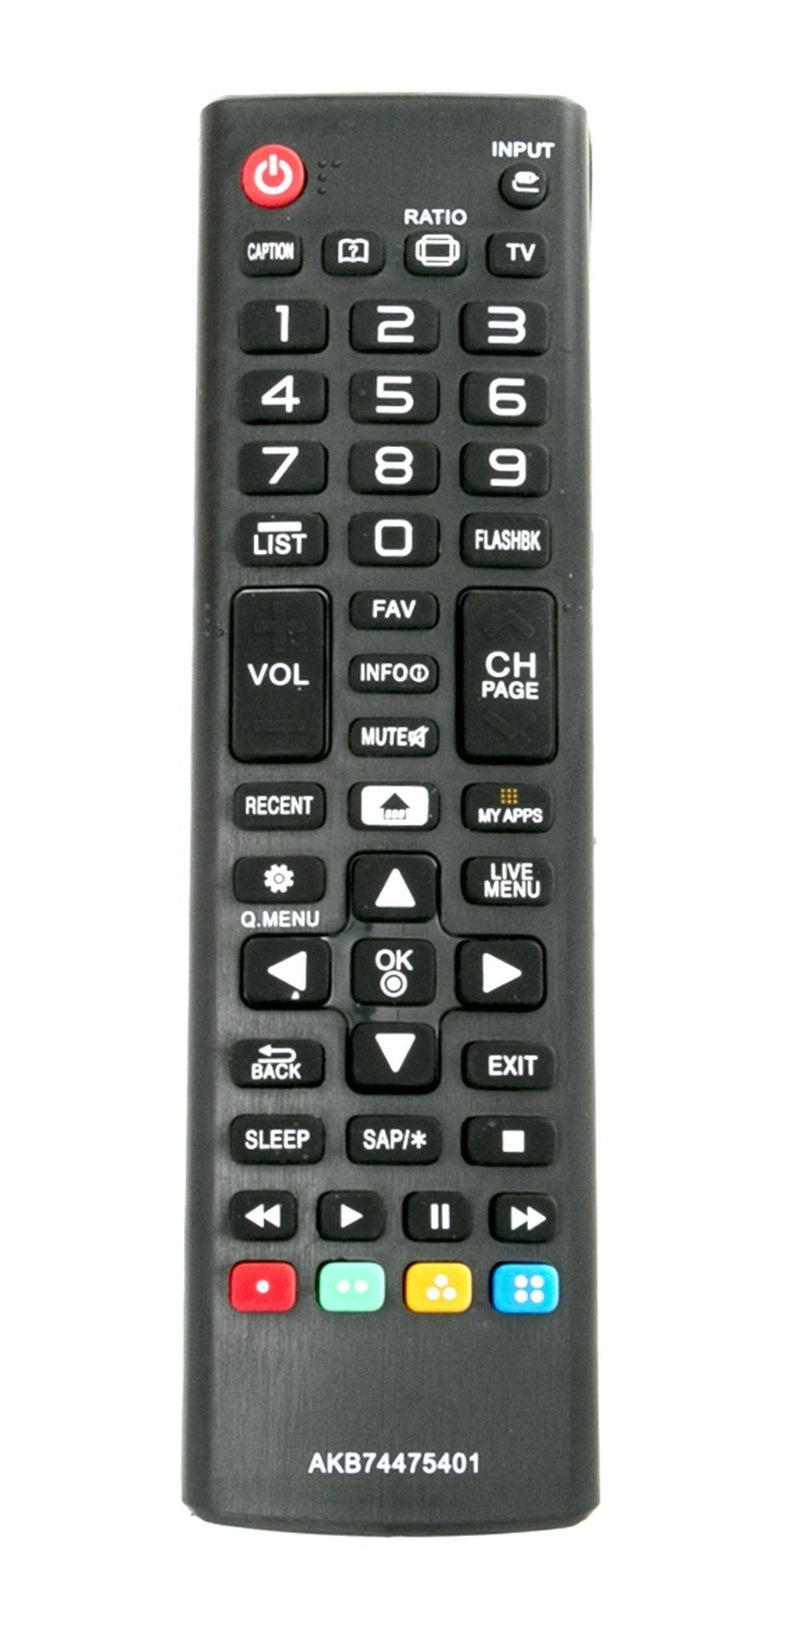 New Replacement AKB74475401 TV Remote fit for LG TV 55UF6450 55UF6790 55UF6800 60UF7300 65LF6350 65UF6450 65UF6490 65UF6790 65UF6800 24LF4820 32LF595B 43LF5900 43UF6400 49UF6400 49UF6430 49UF6490 - LeoForward Australia